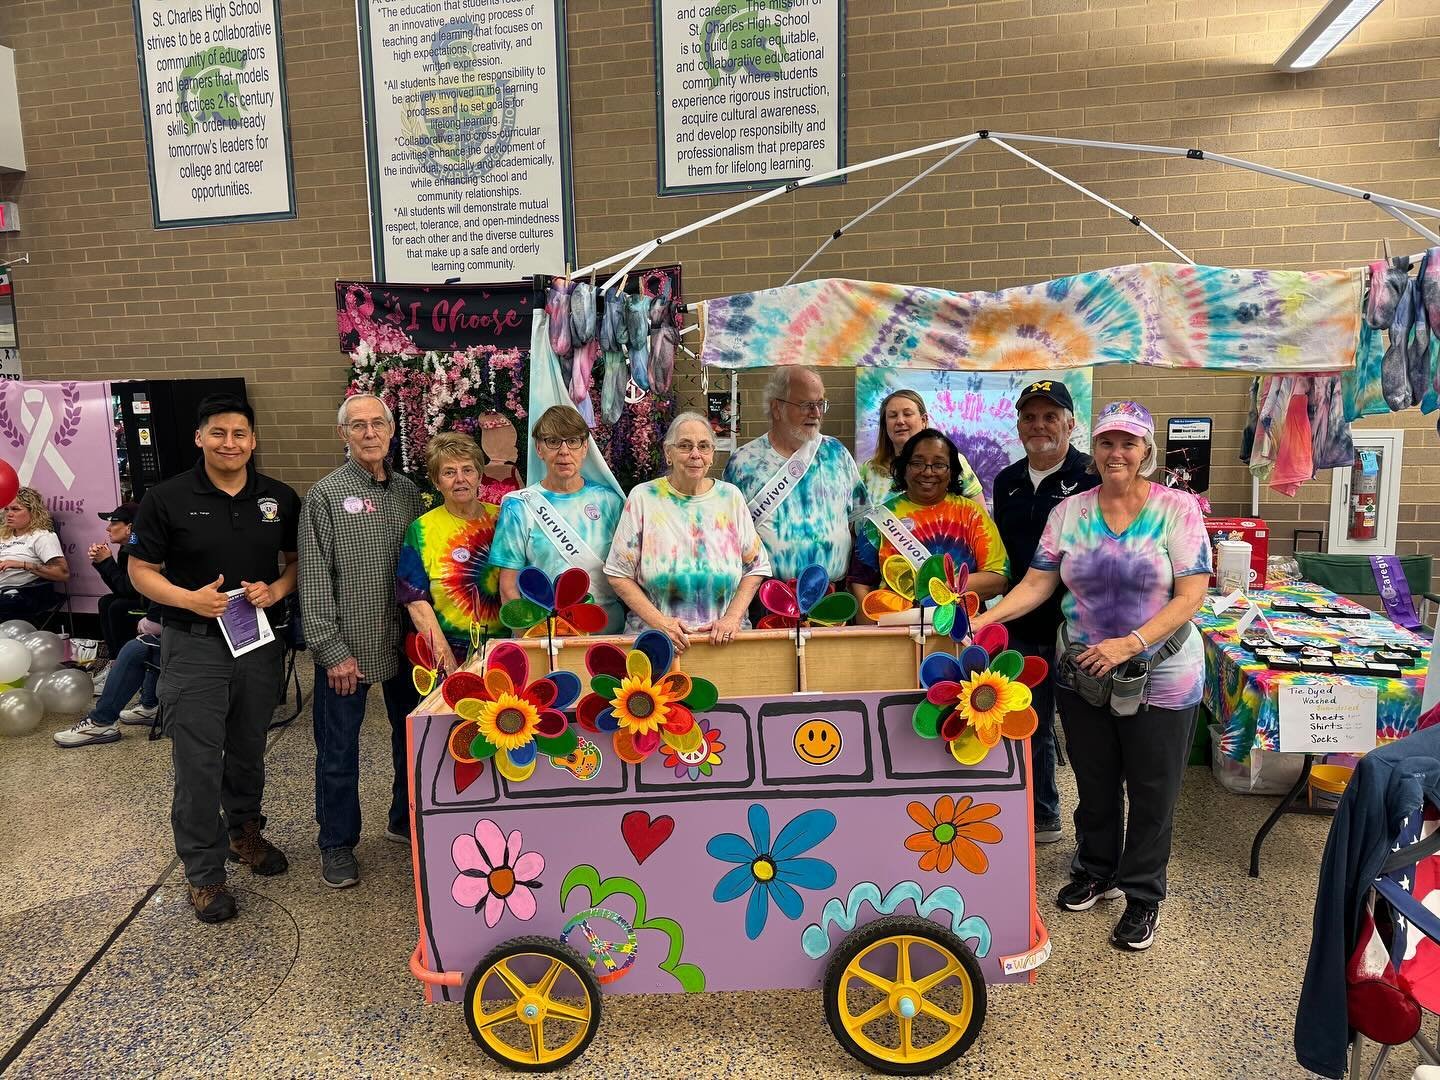 Some employees from our East site participated in the Relay For Life earlier this month to help raise money for those who are currently fighting cancer. The funds help through by supporting research and providing free rides to chemo and lodging near 